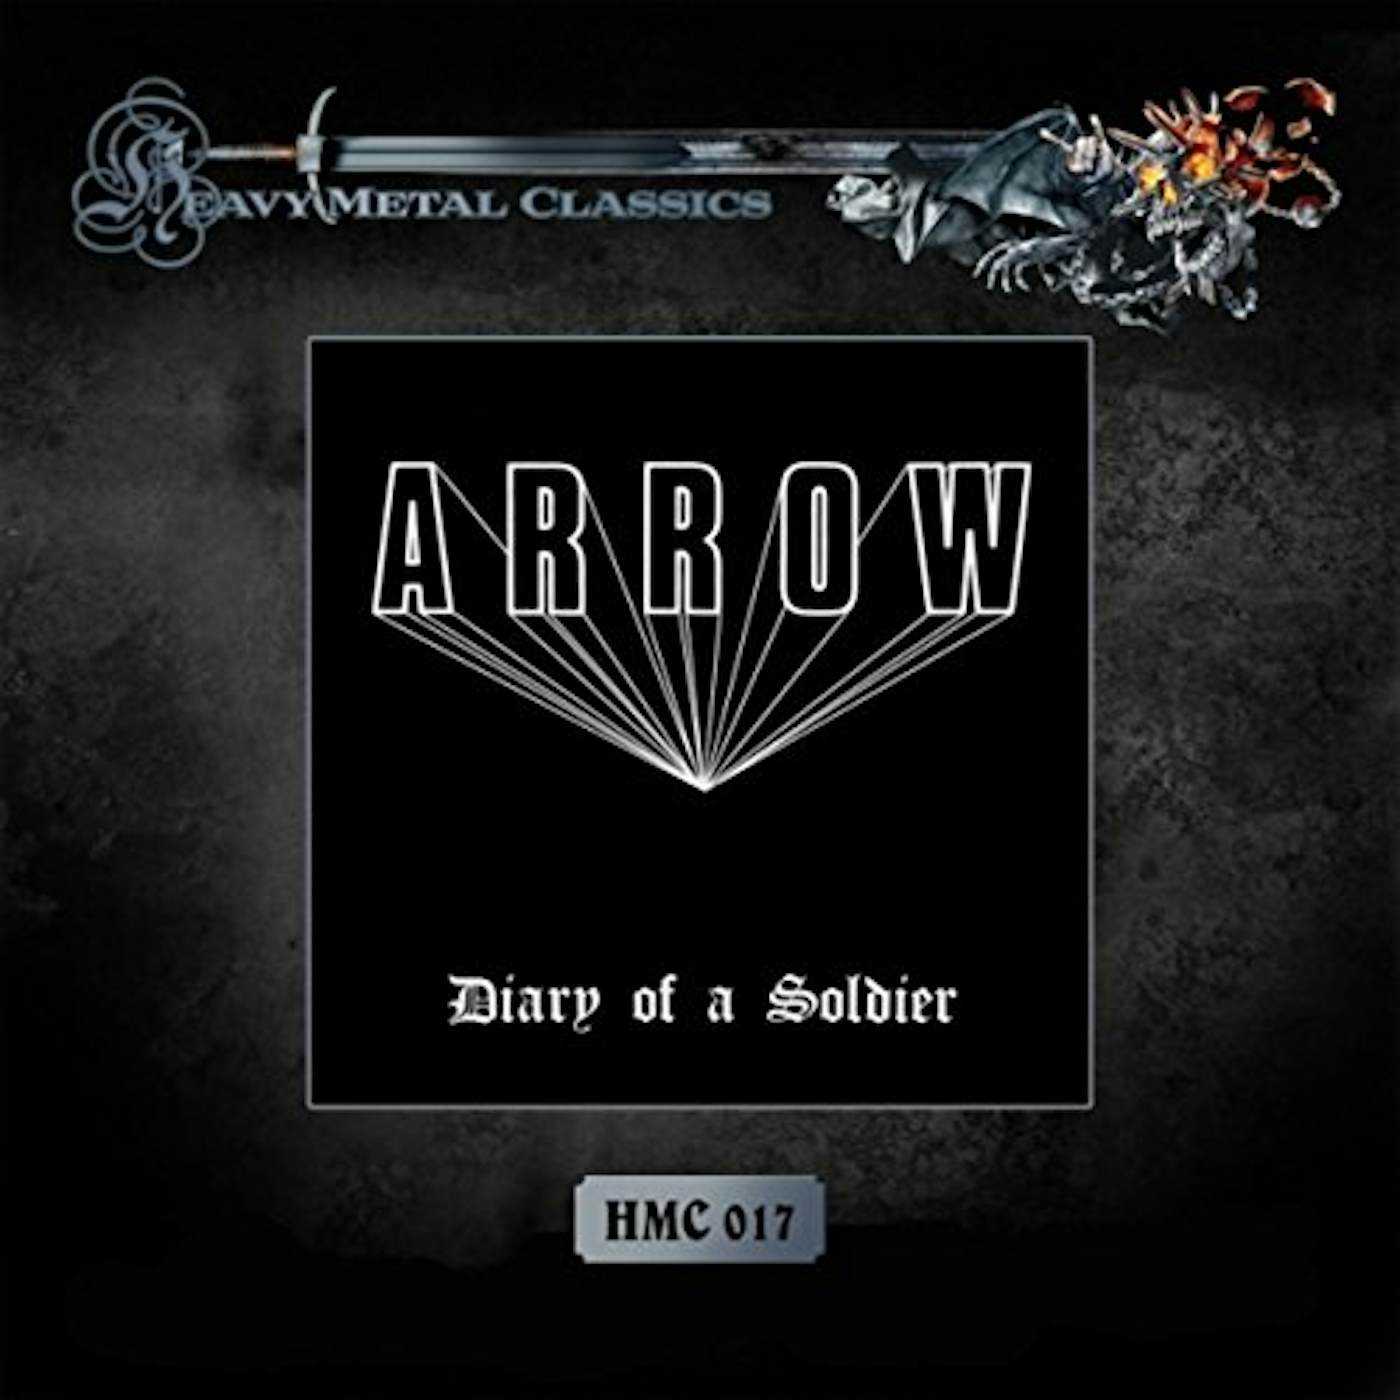 Arrow Diary Of A Soldier Vinyl Record